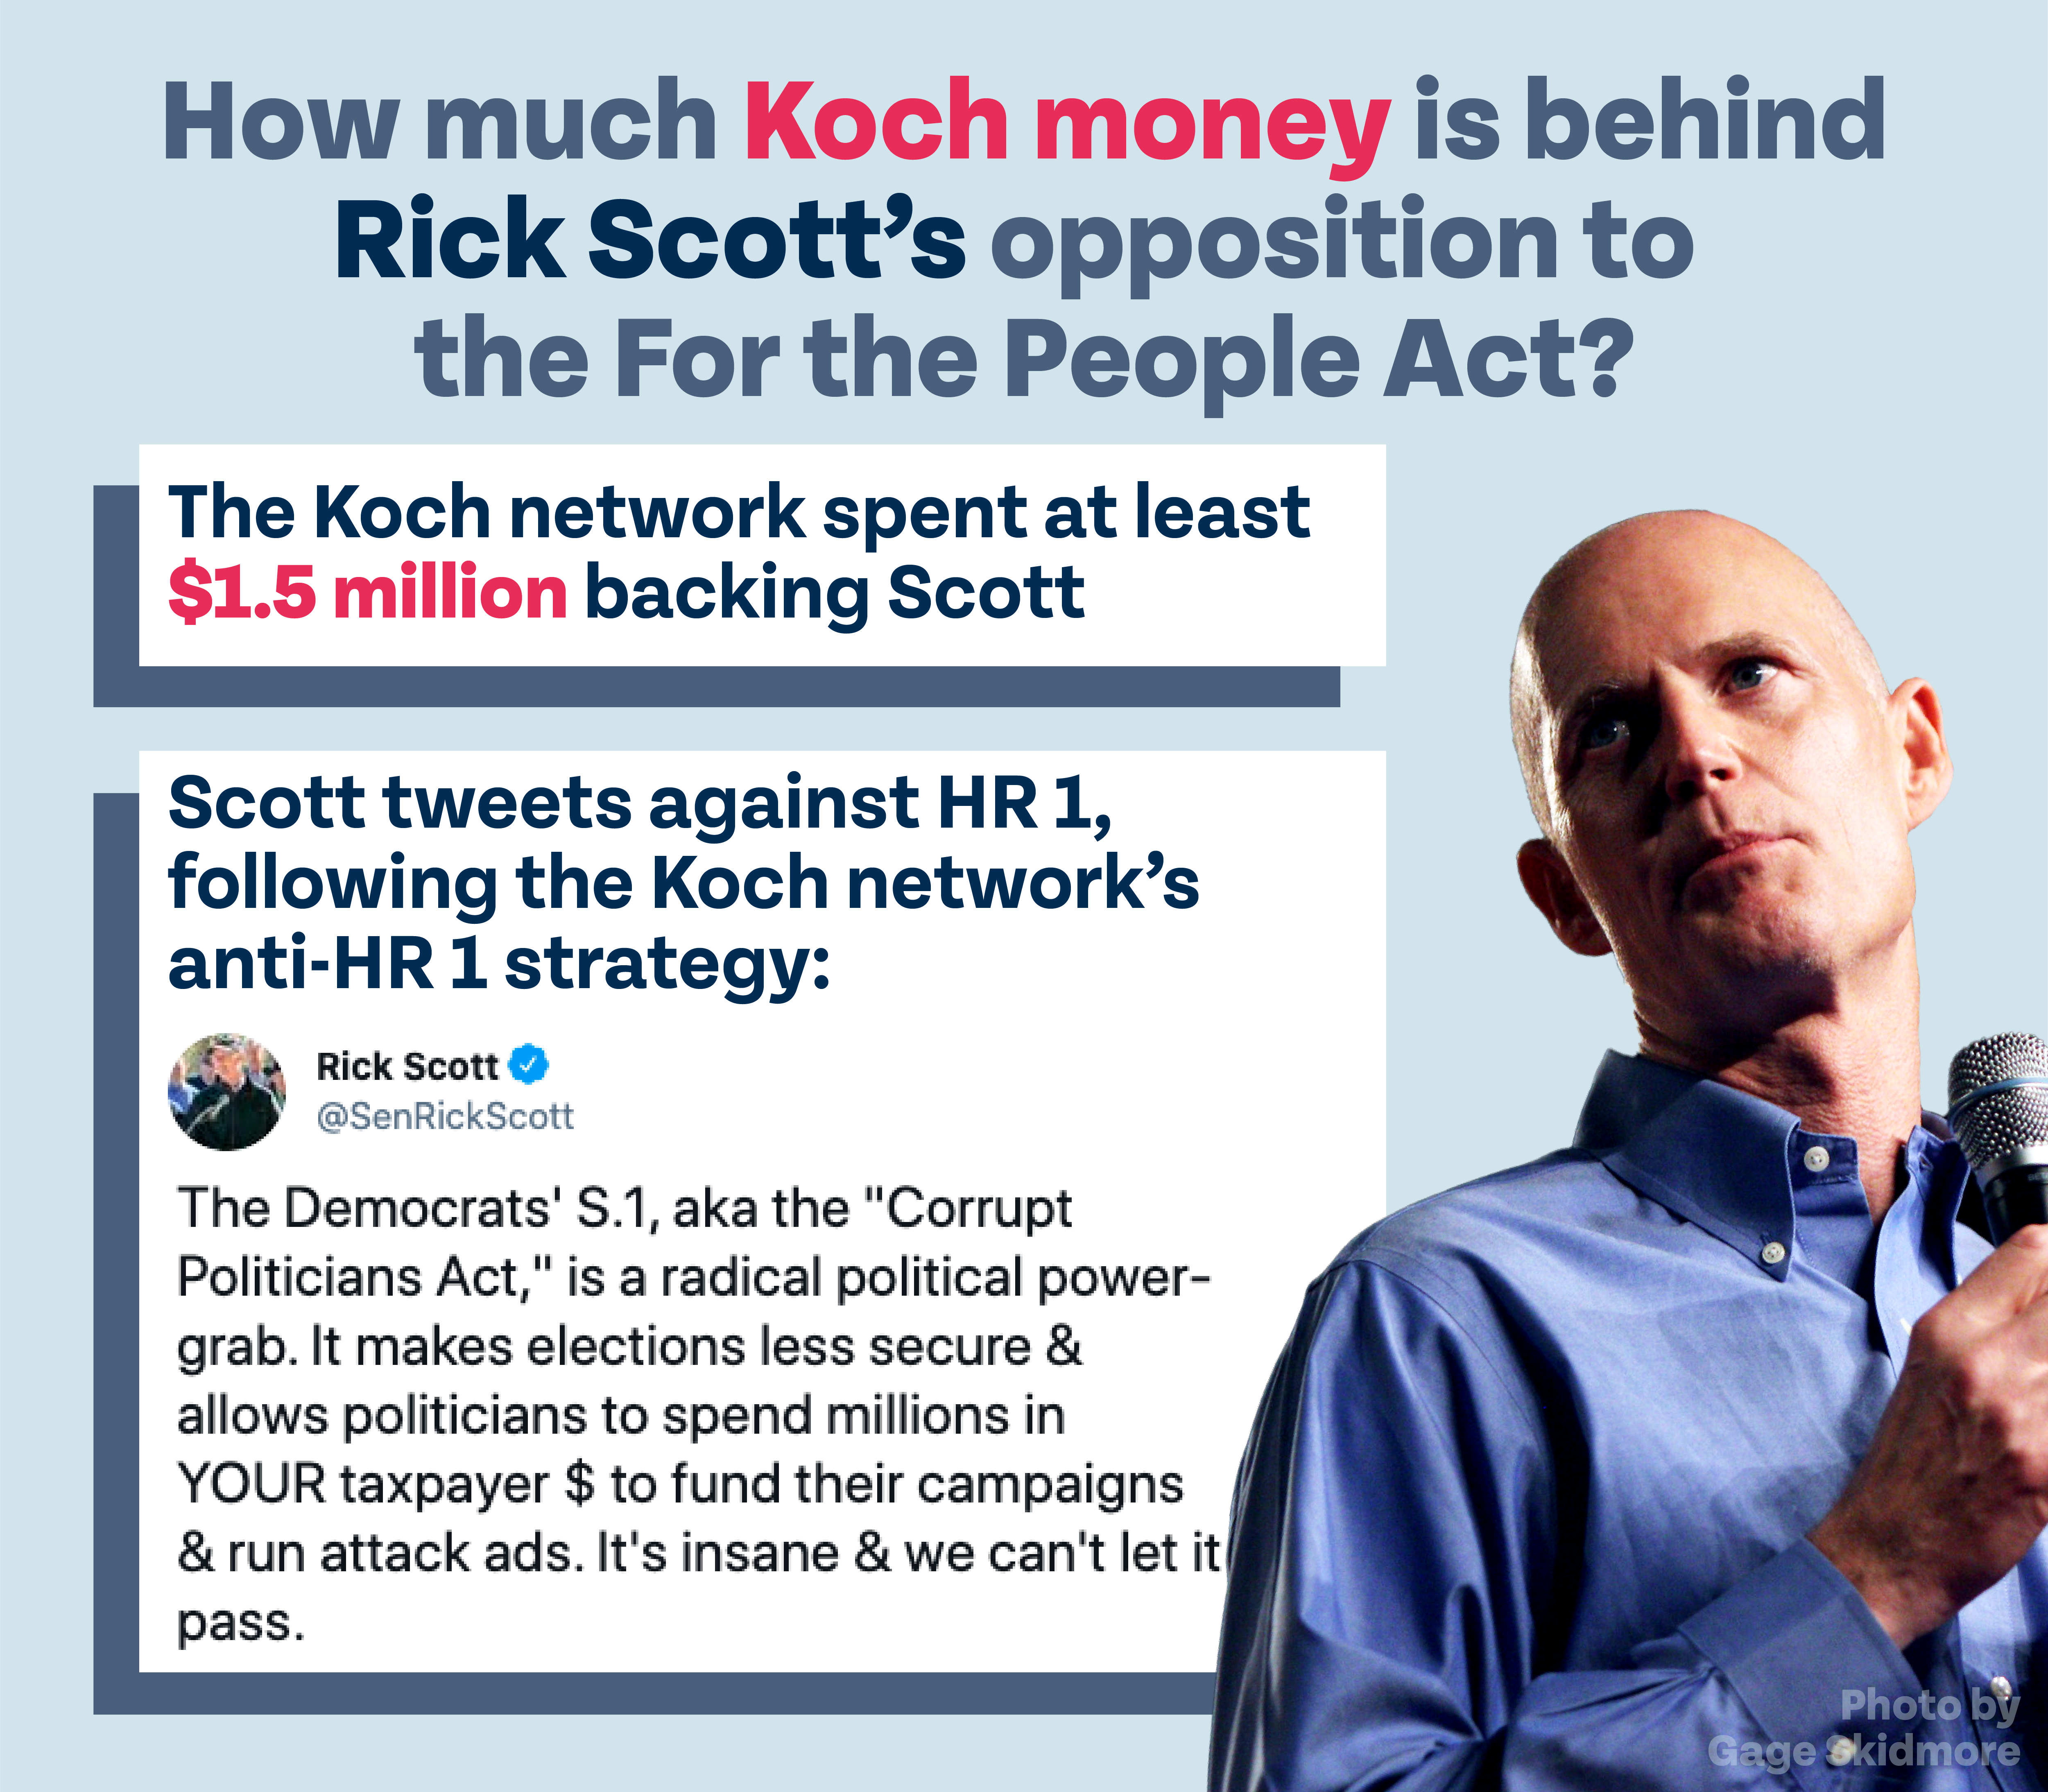 How much Koch money is behind Rick Scott's opposition to the For the People Act? The Koch network spent at least $1.5 million backing Scott. Scott tweets against HR 1, following the Koch network’s anti-HR 1 strategy: "The Democrats' S.1, aka the "Corrupt Politicians Act," is a radical political power-grab. It makes elections less secure & allows politicians to spend millions in YOUR taxpayer $ to fund their campaigns & run attack ads. It's insane & we can't let it pass." Photo by Gage Skidmore.